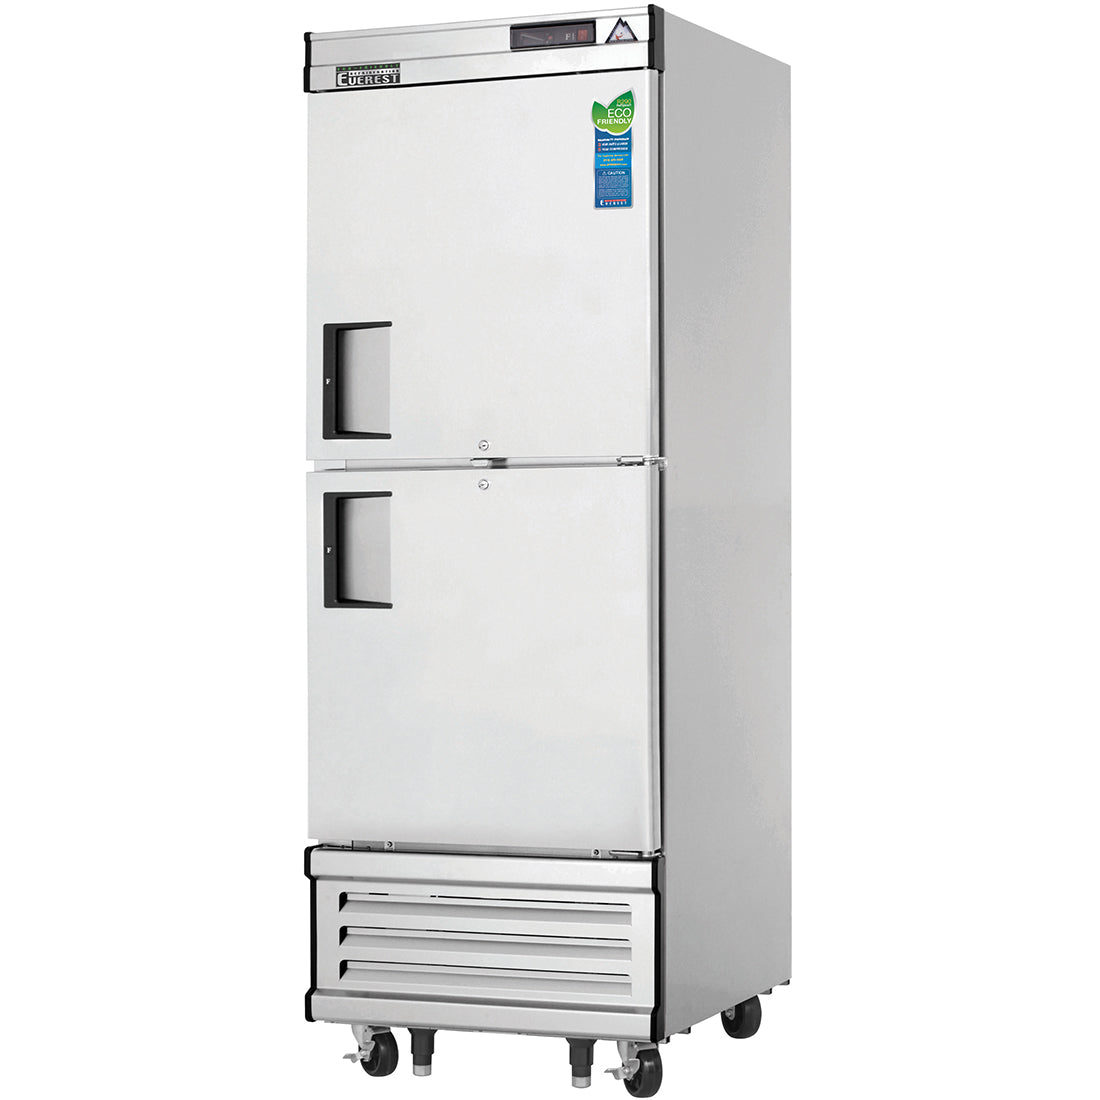 Everest EB Series-EBWFH2 One Section Two Half Door Upright Reach-In Freezer - 23 Cu.